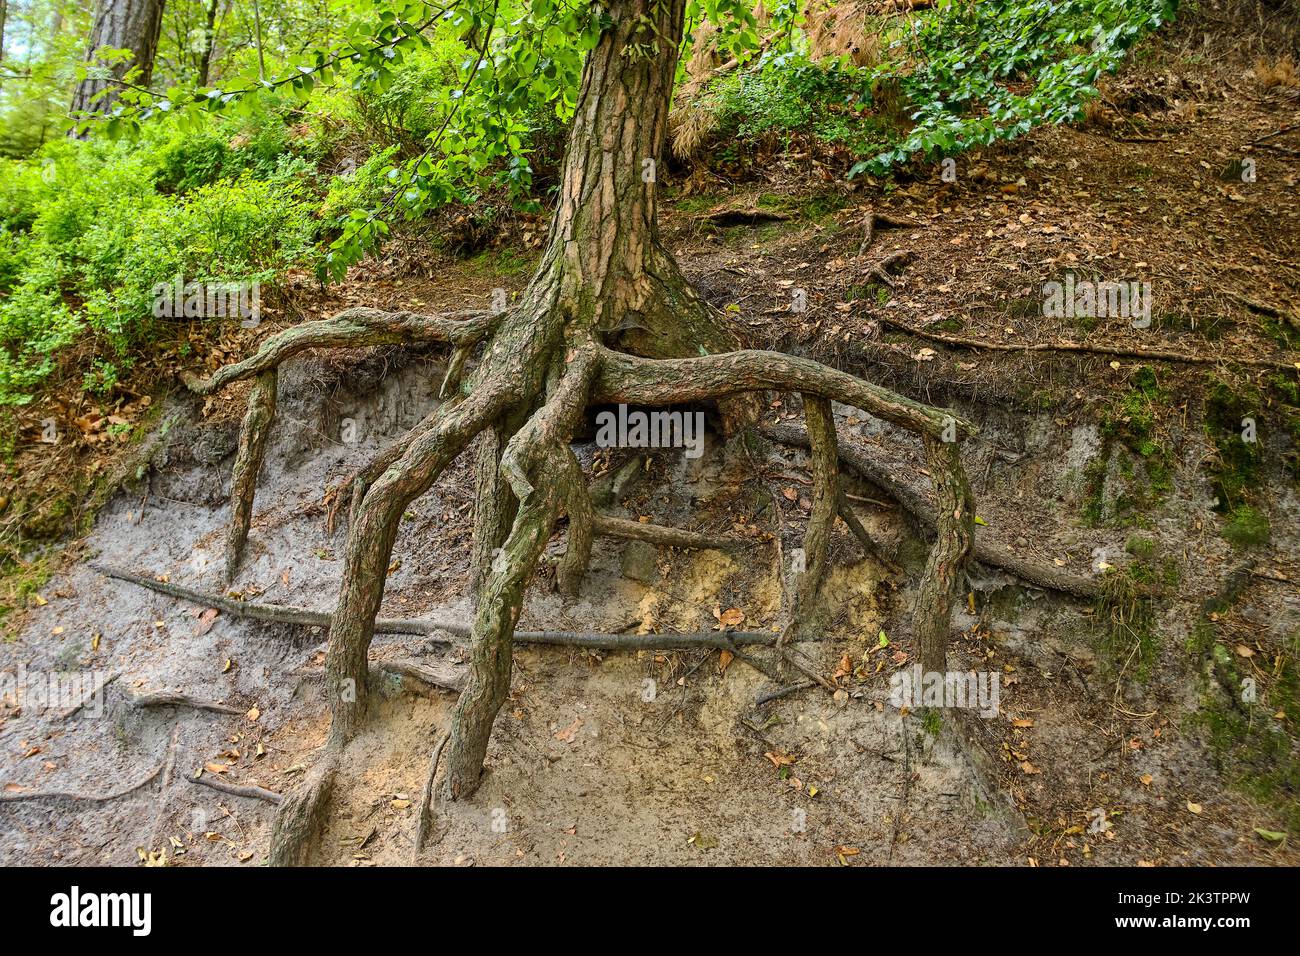 Tree with exposed roots on the edge of a slope in a forest environment. Stock Photo